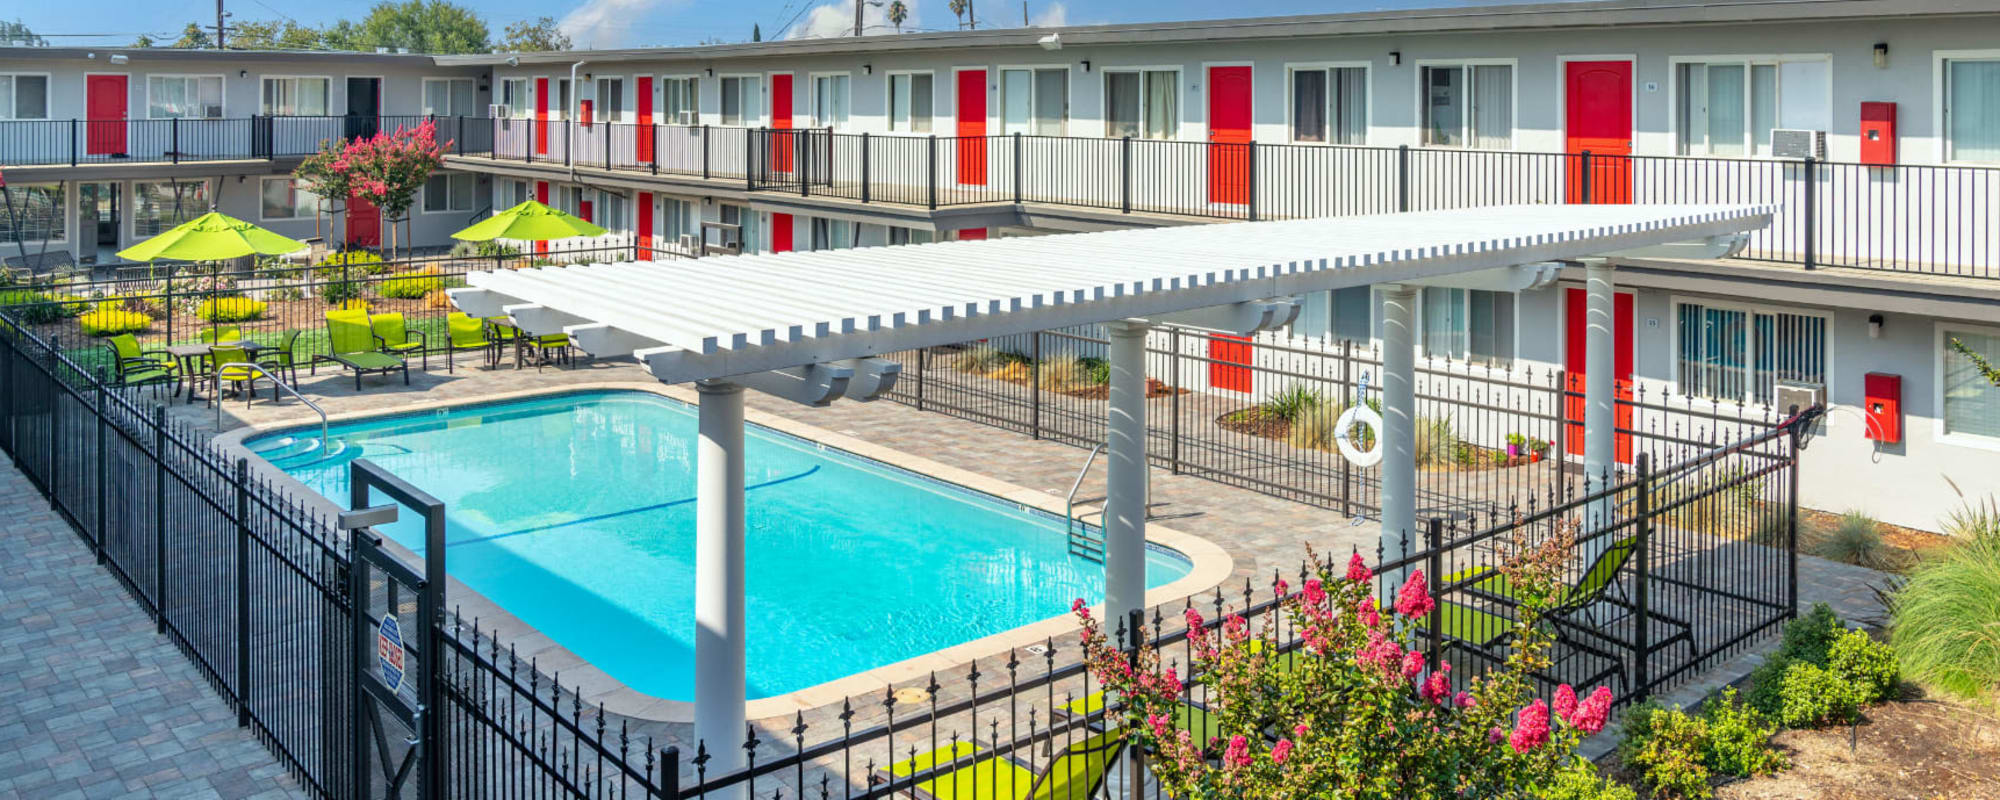 Photo Gallery | Royal Gardens Apartments in Livermore, California